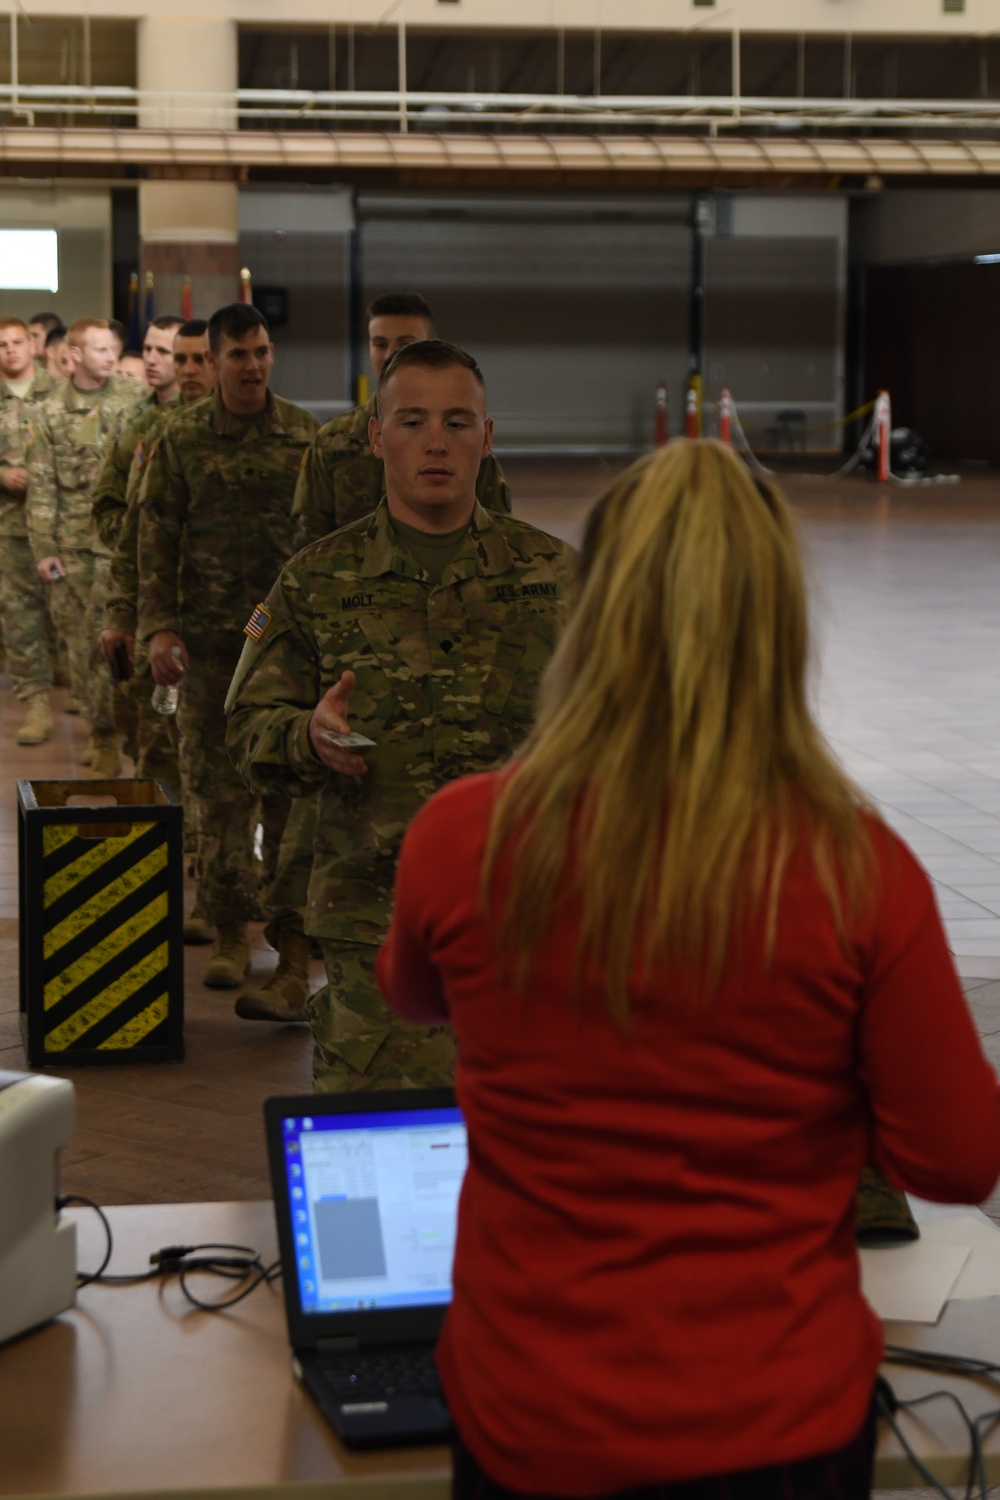 Keeping M.K. air base safe and secure: 215th MP Det., 467th Eng. Det. deploy in support of Op Freedom’s Sentinel